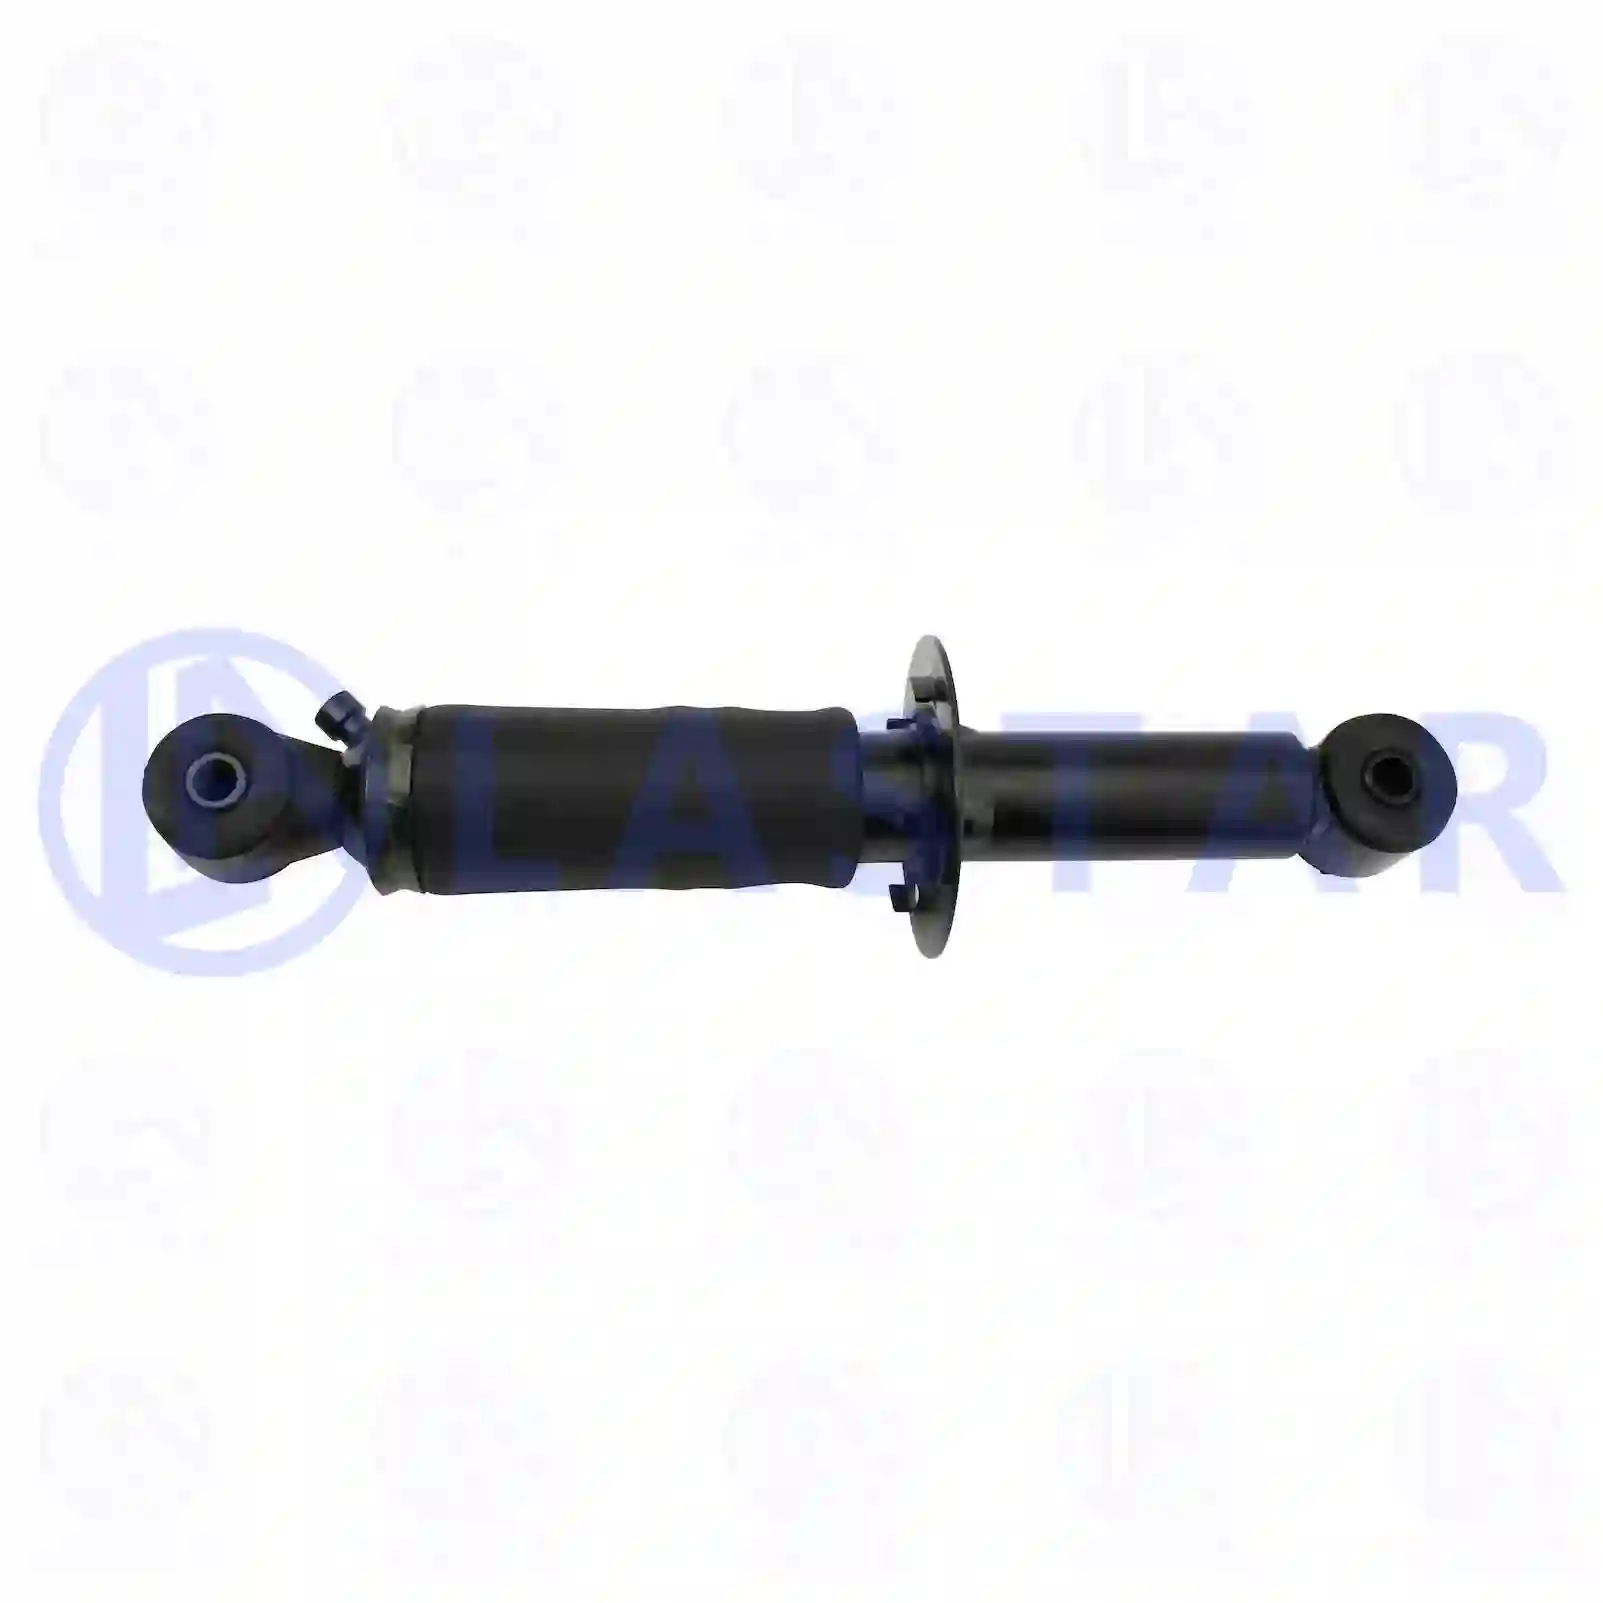 Cabin shock absorber, with air bellow, 77735737, 1075444, , , , ||  77735737 Lastar Spare Part | Truck Spare Parts, Auotomotive Spare Parts Cabin shock absorber, with air bellow, 77735737, 1075444, , , , ||  77735737 Lastar Spare Part | Truck Spare Parts, Auotomotive Spare Parts